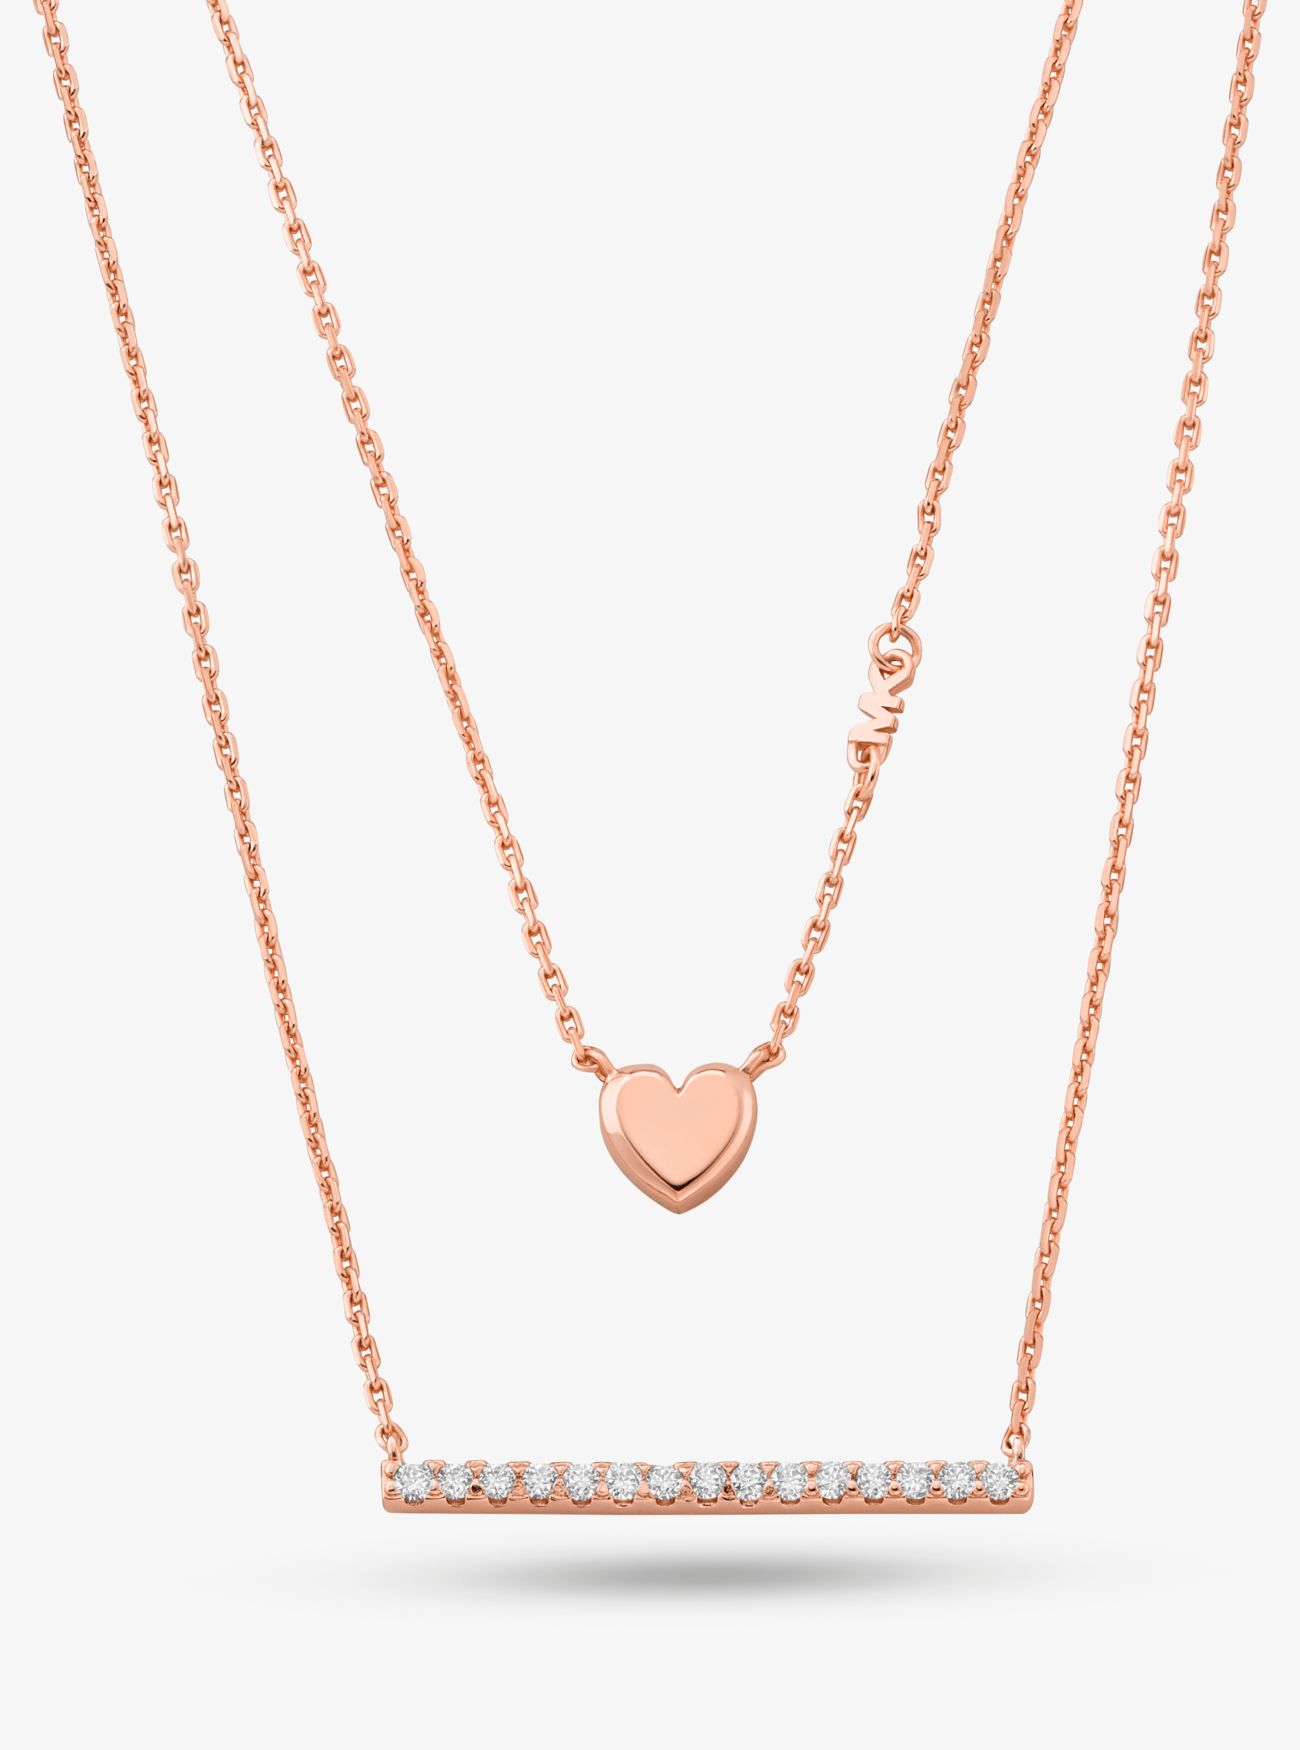 MK Precious Metal-Plated Sterling Silver Double Heart and PavÃ© Bar Necklace - Rose Gold - Michael Kors